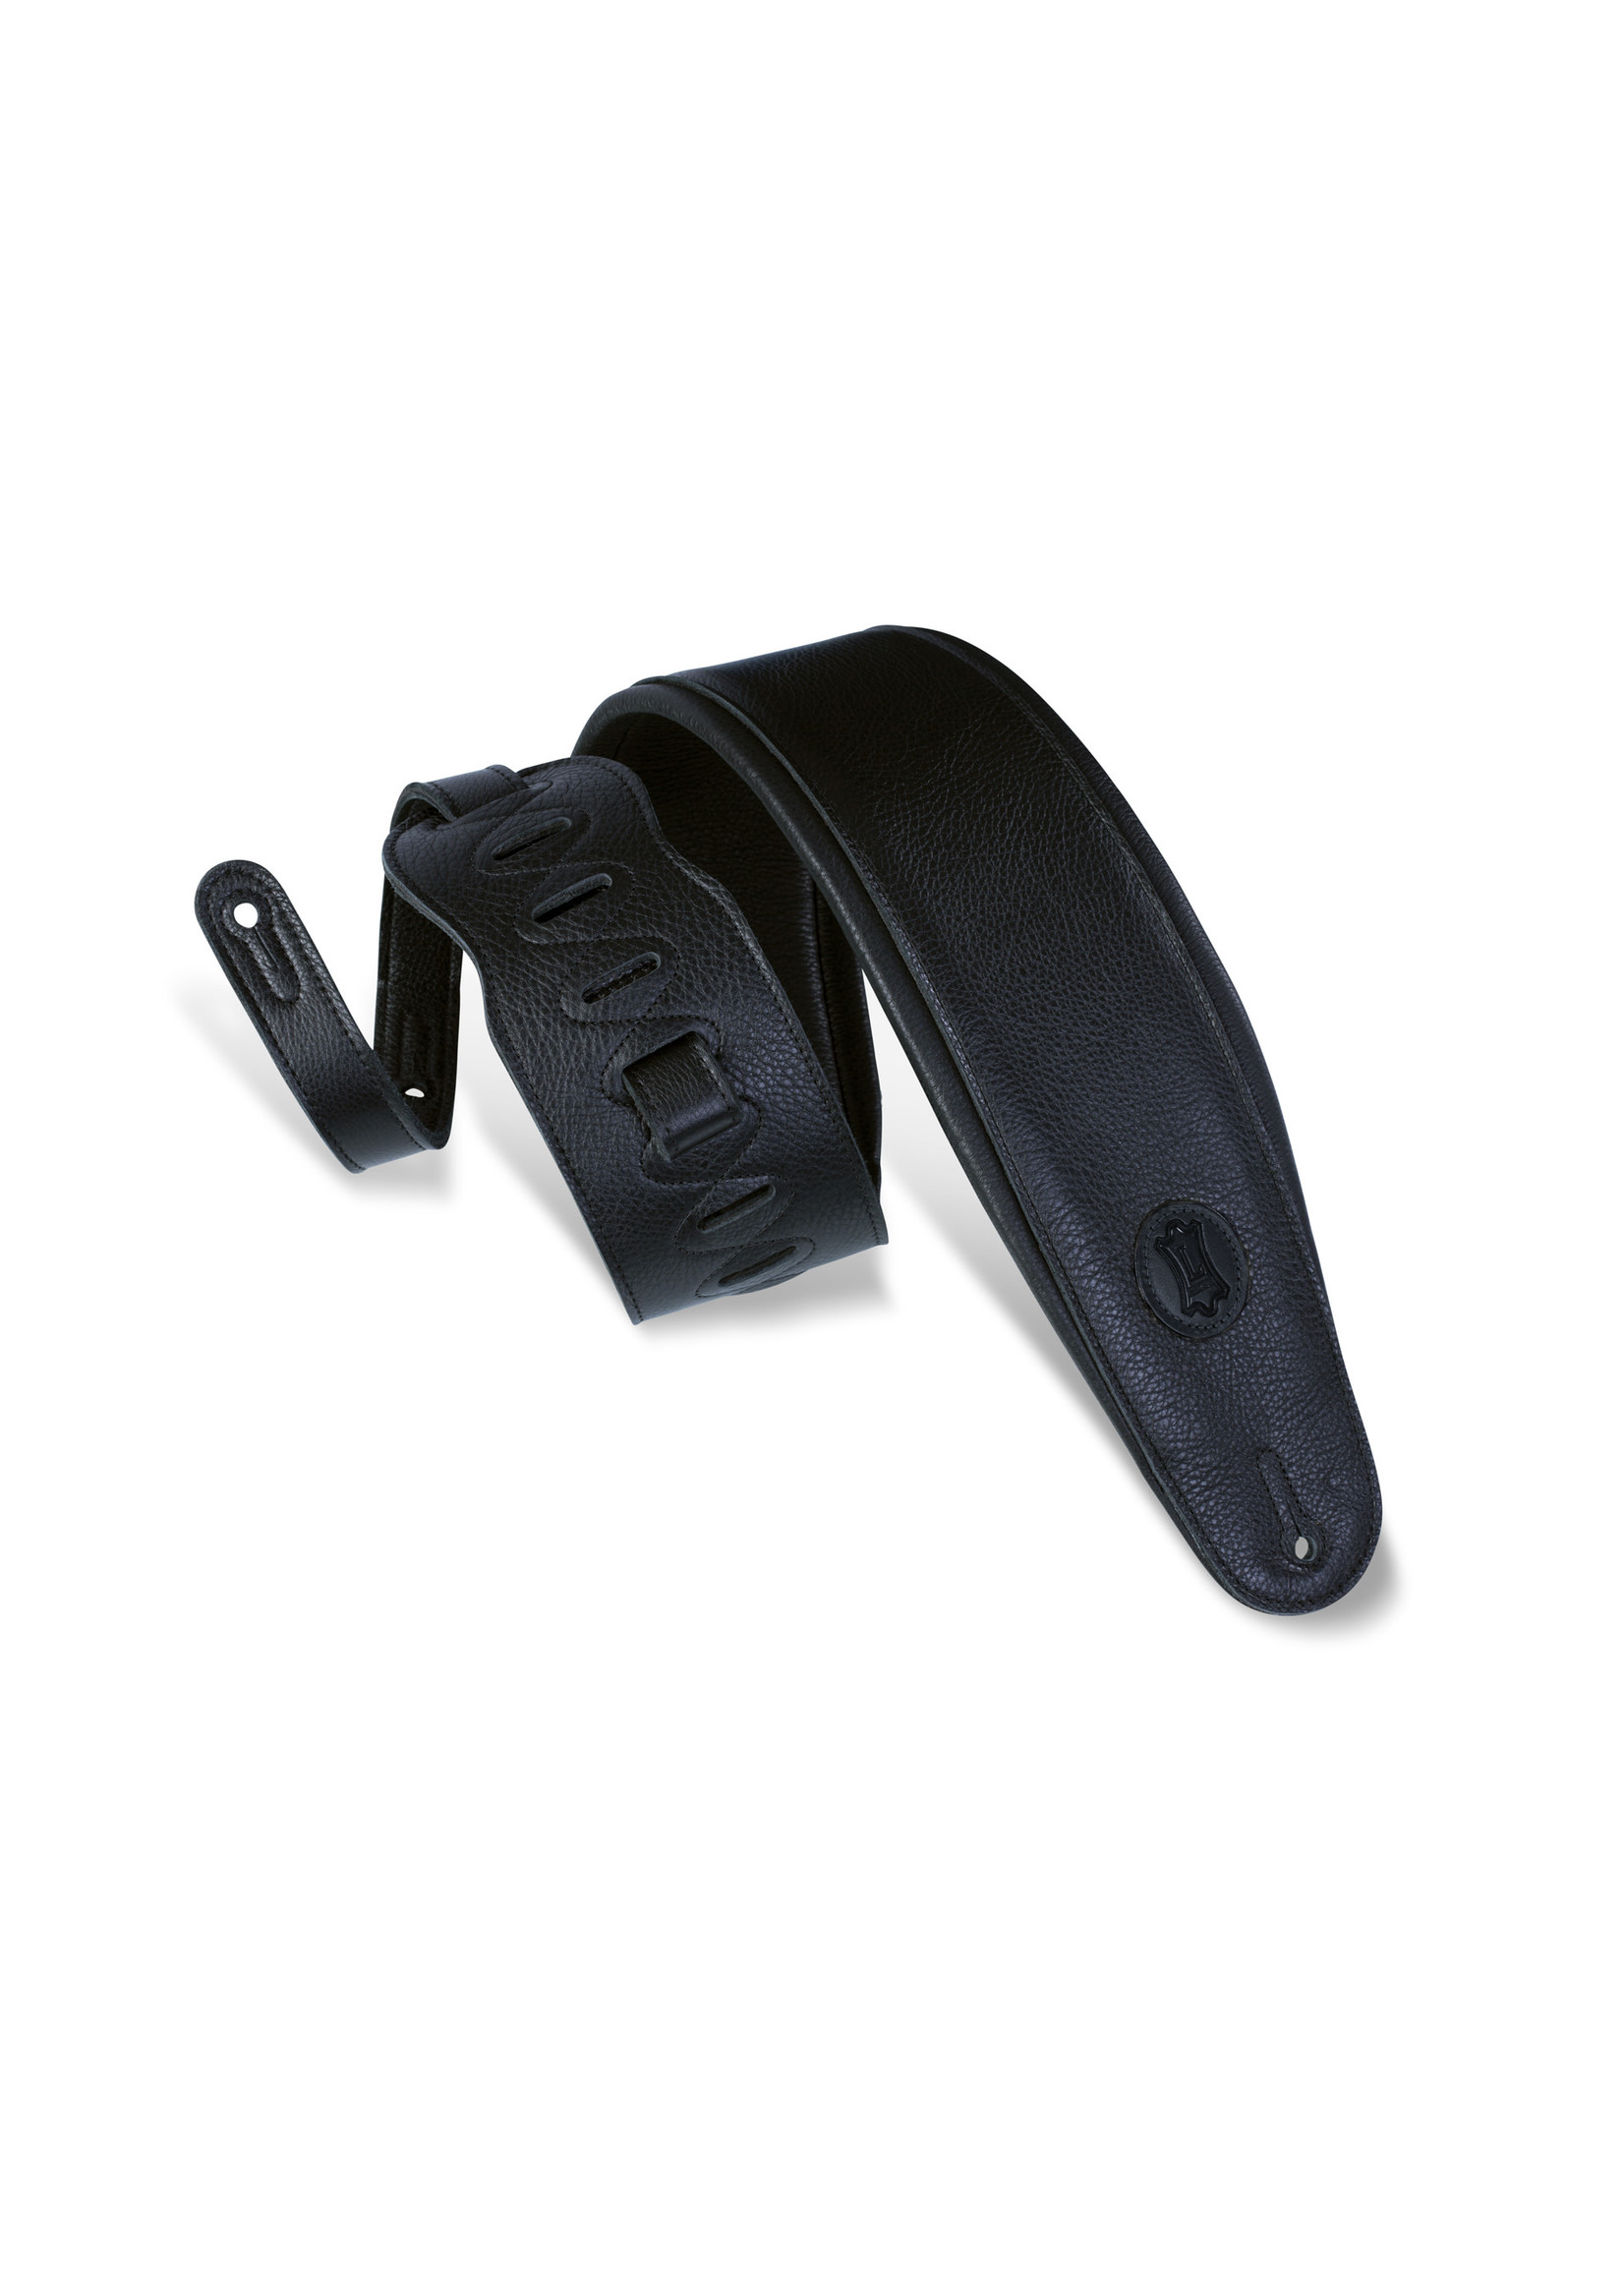 Levy's Levy's Guitar Strap 4" Wide Leather Black MSSB2-4-BLK